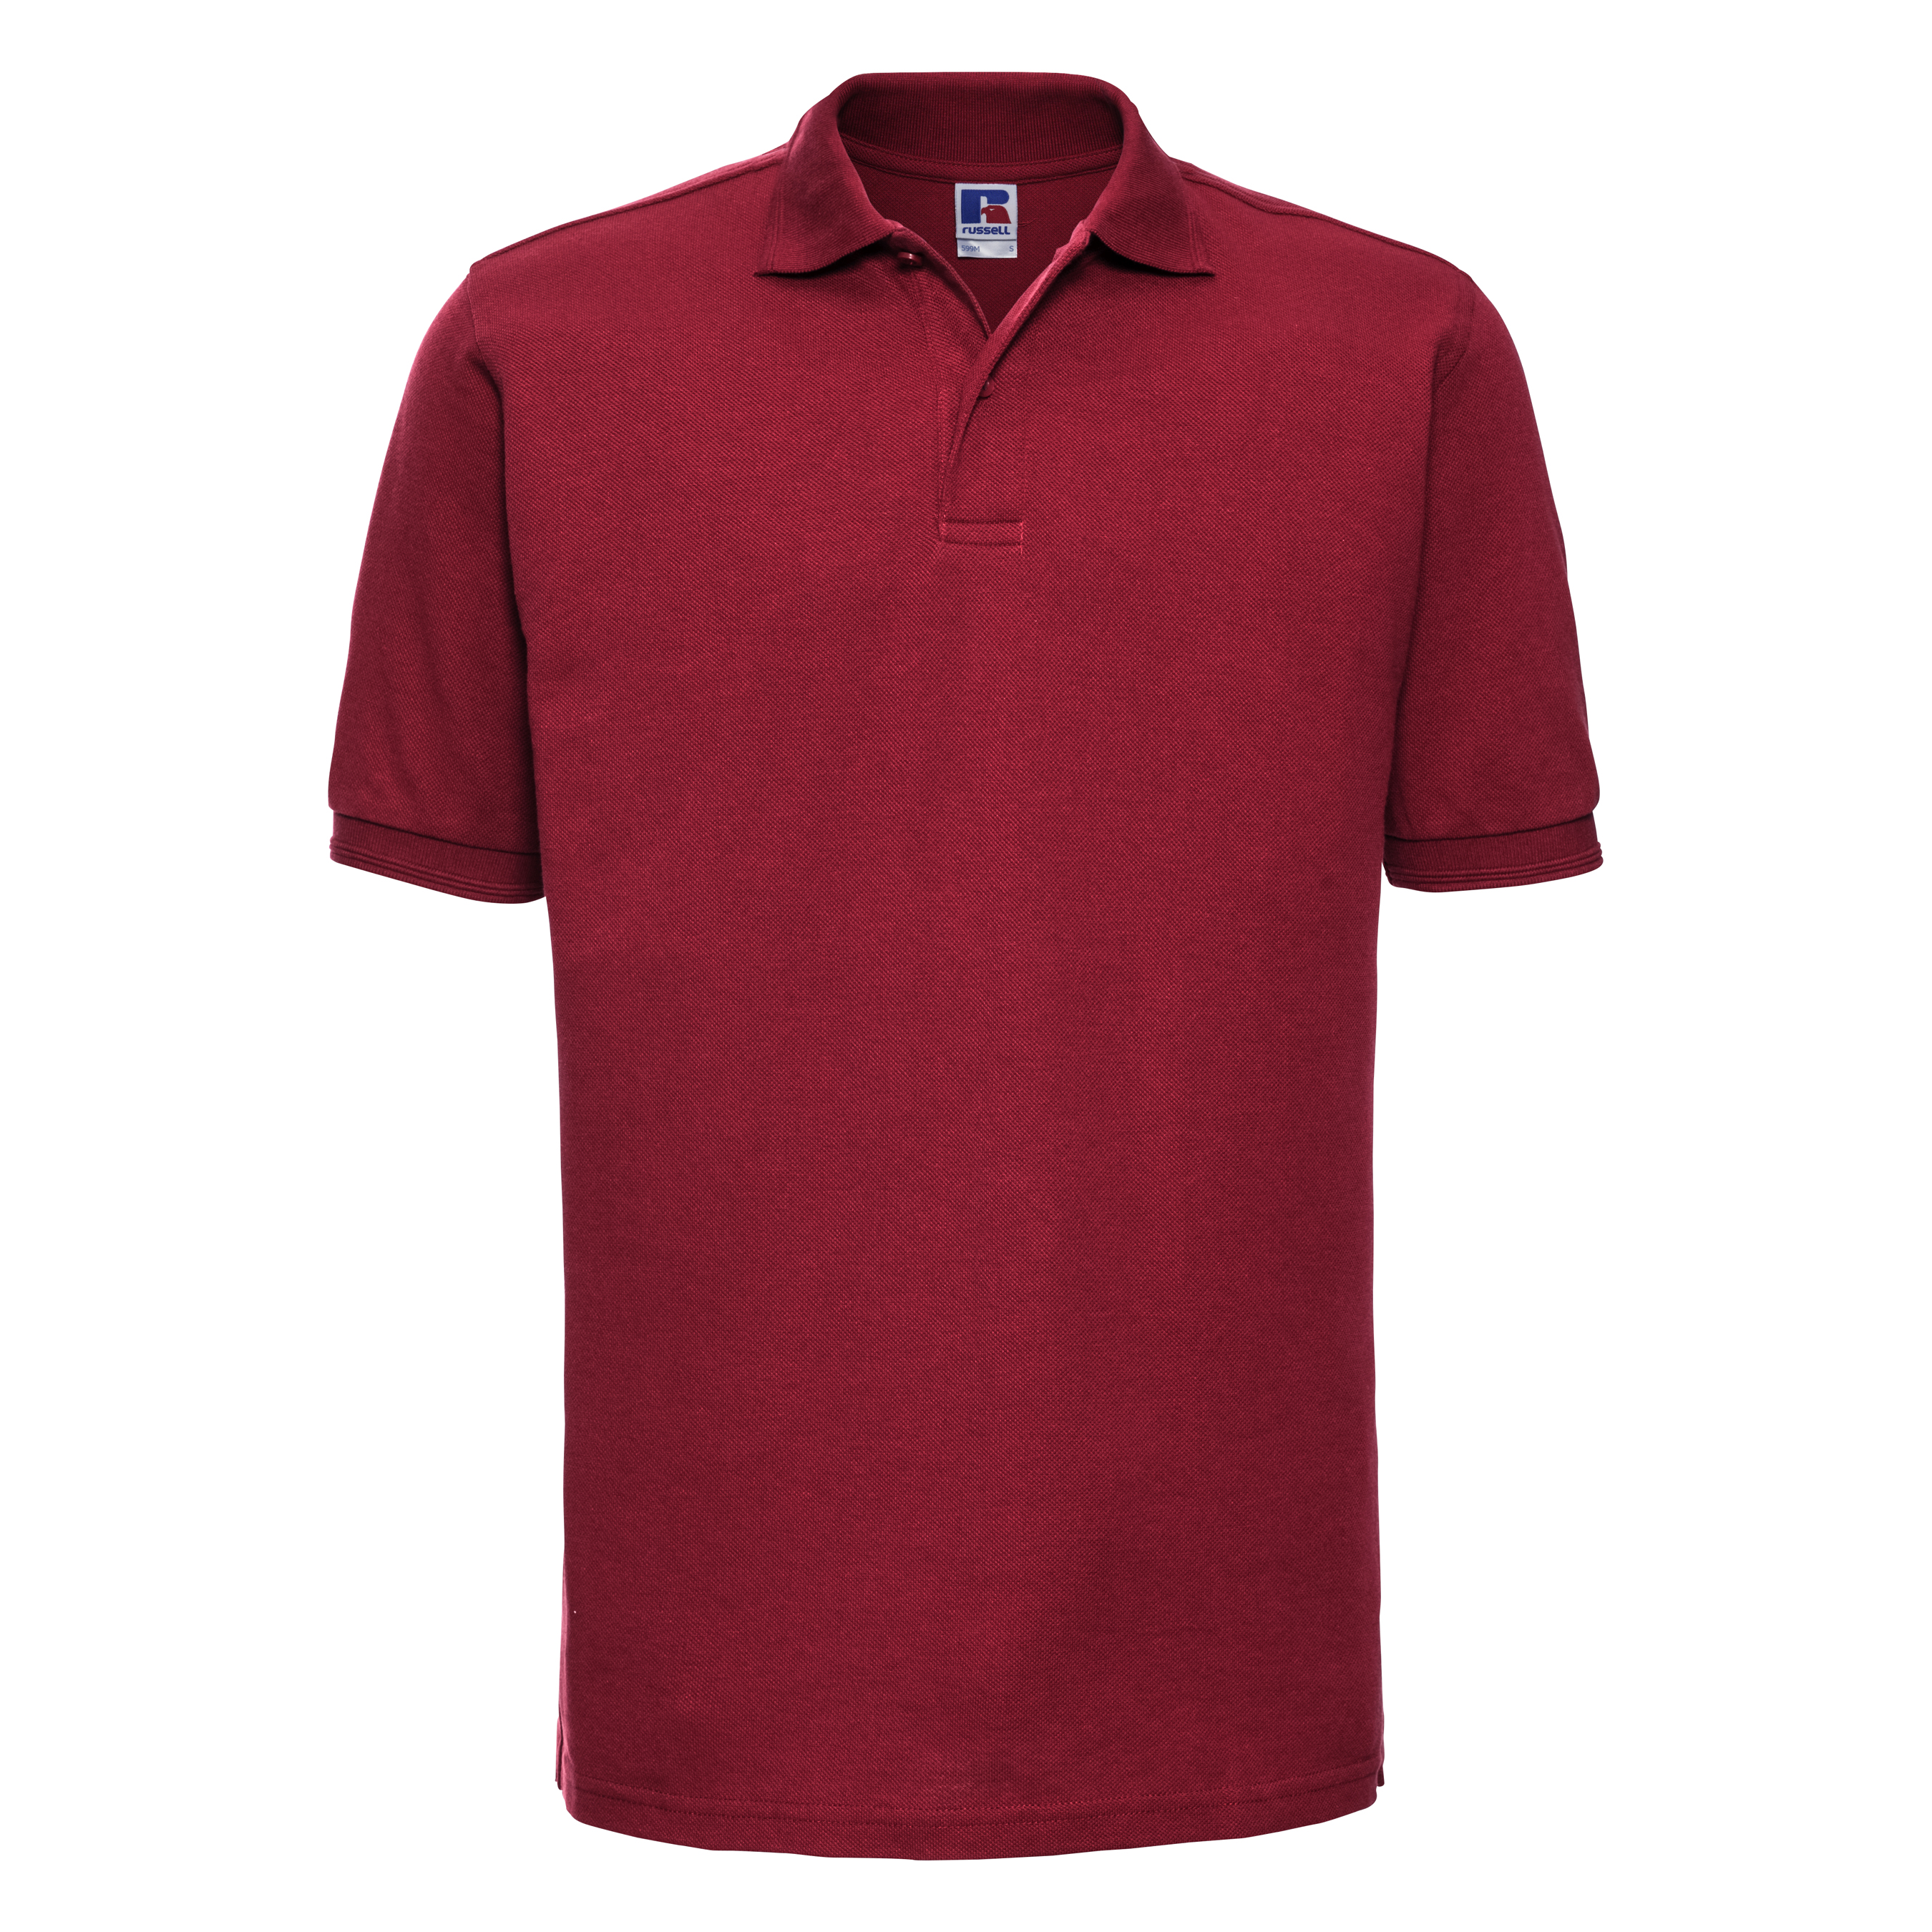 ax-httpswebsystems.s3.amazonaws.comtmp_for_downloadrussell-hardwearing-wash-polo-classic-red.jpg